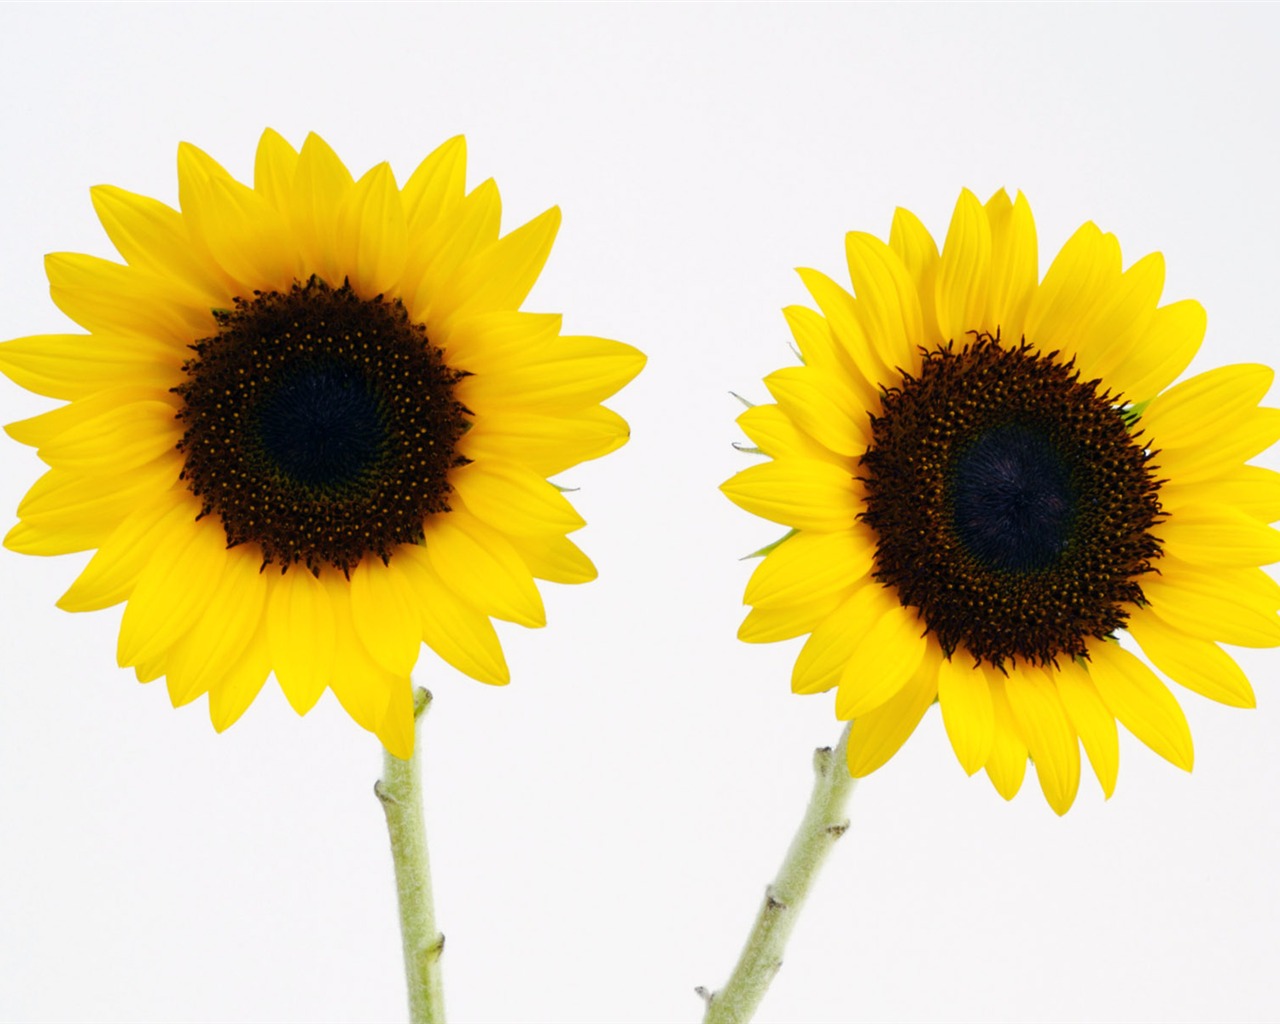 Sunny sunflower photo HD Wallpapers #32 - 1280x1024